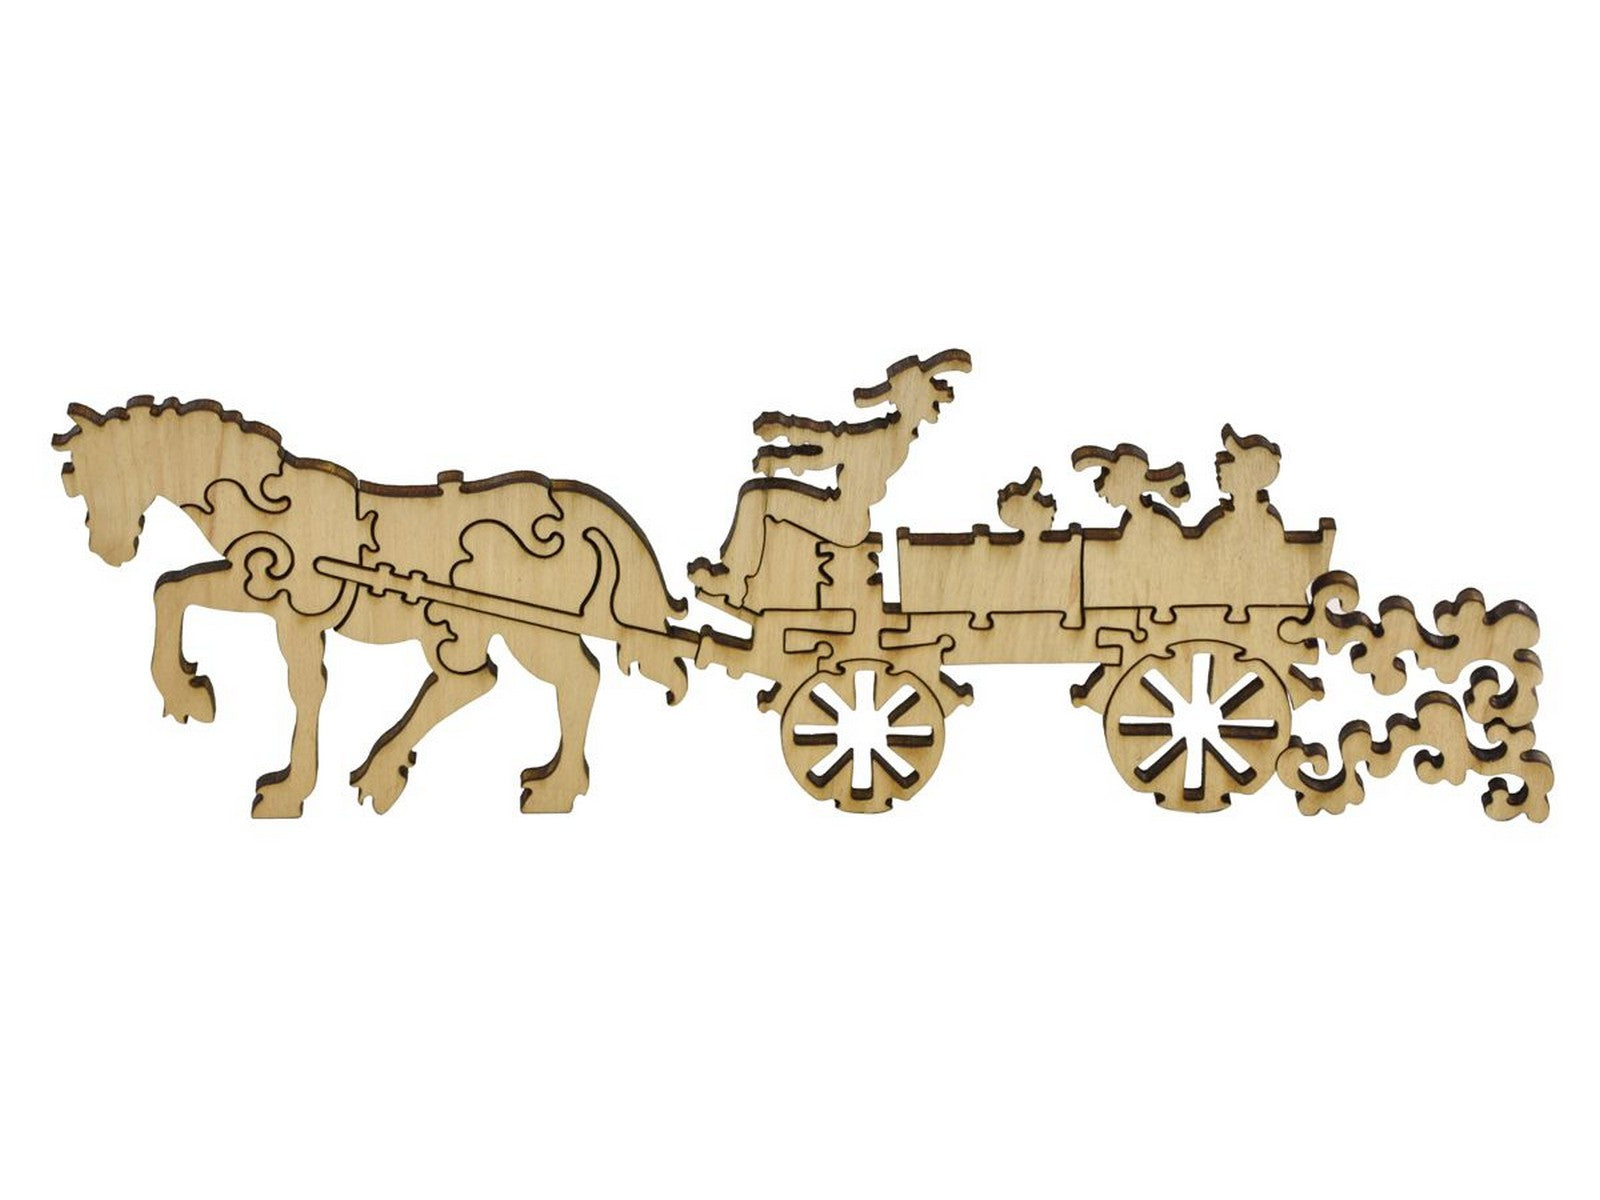 A closeup of pieces in the shape of a horse pulling a wagon. 